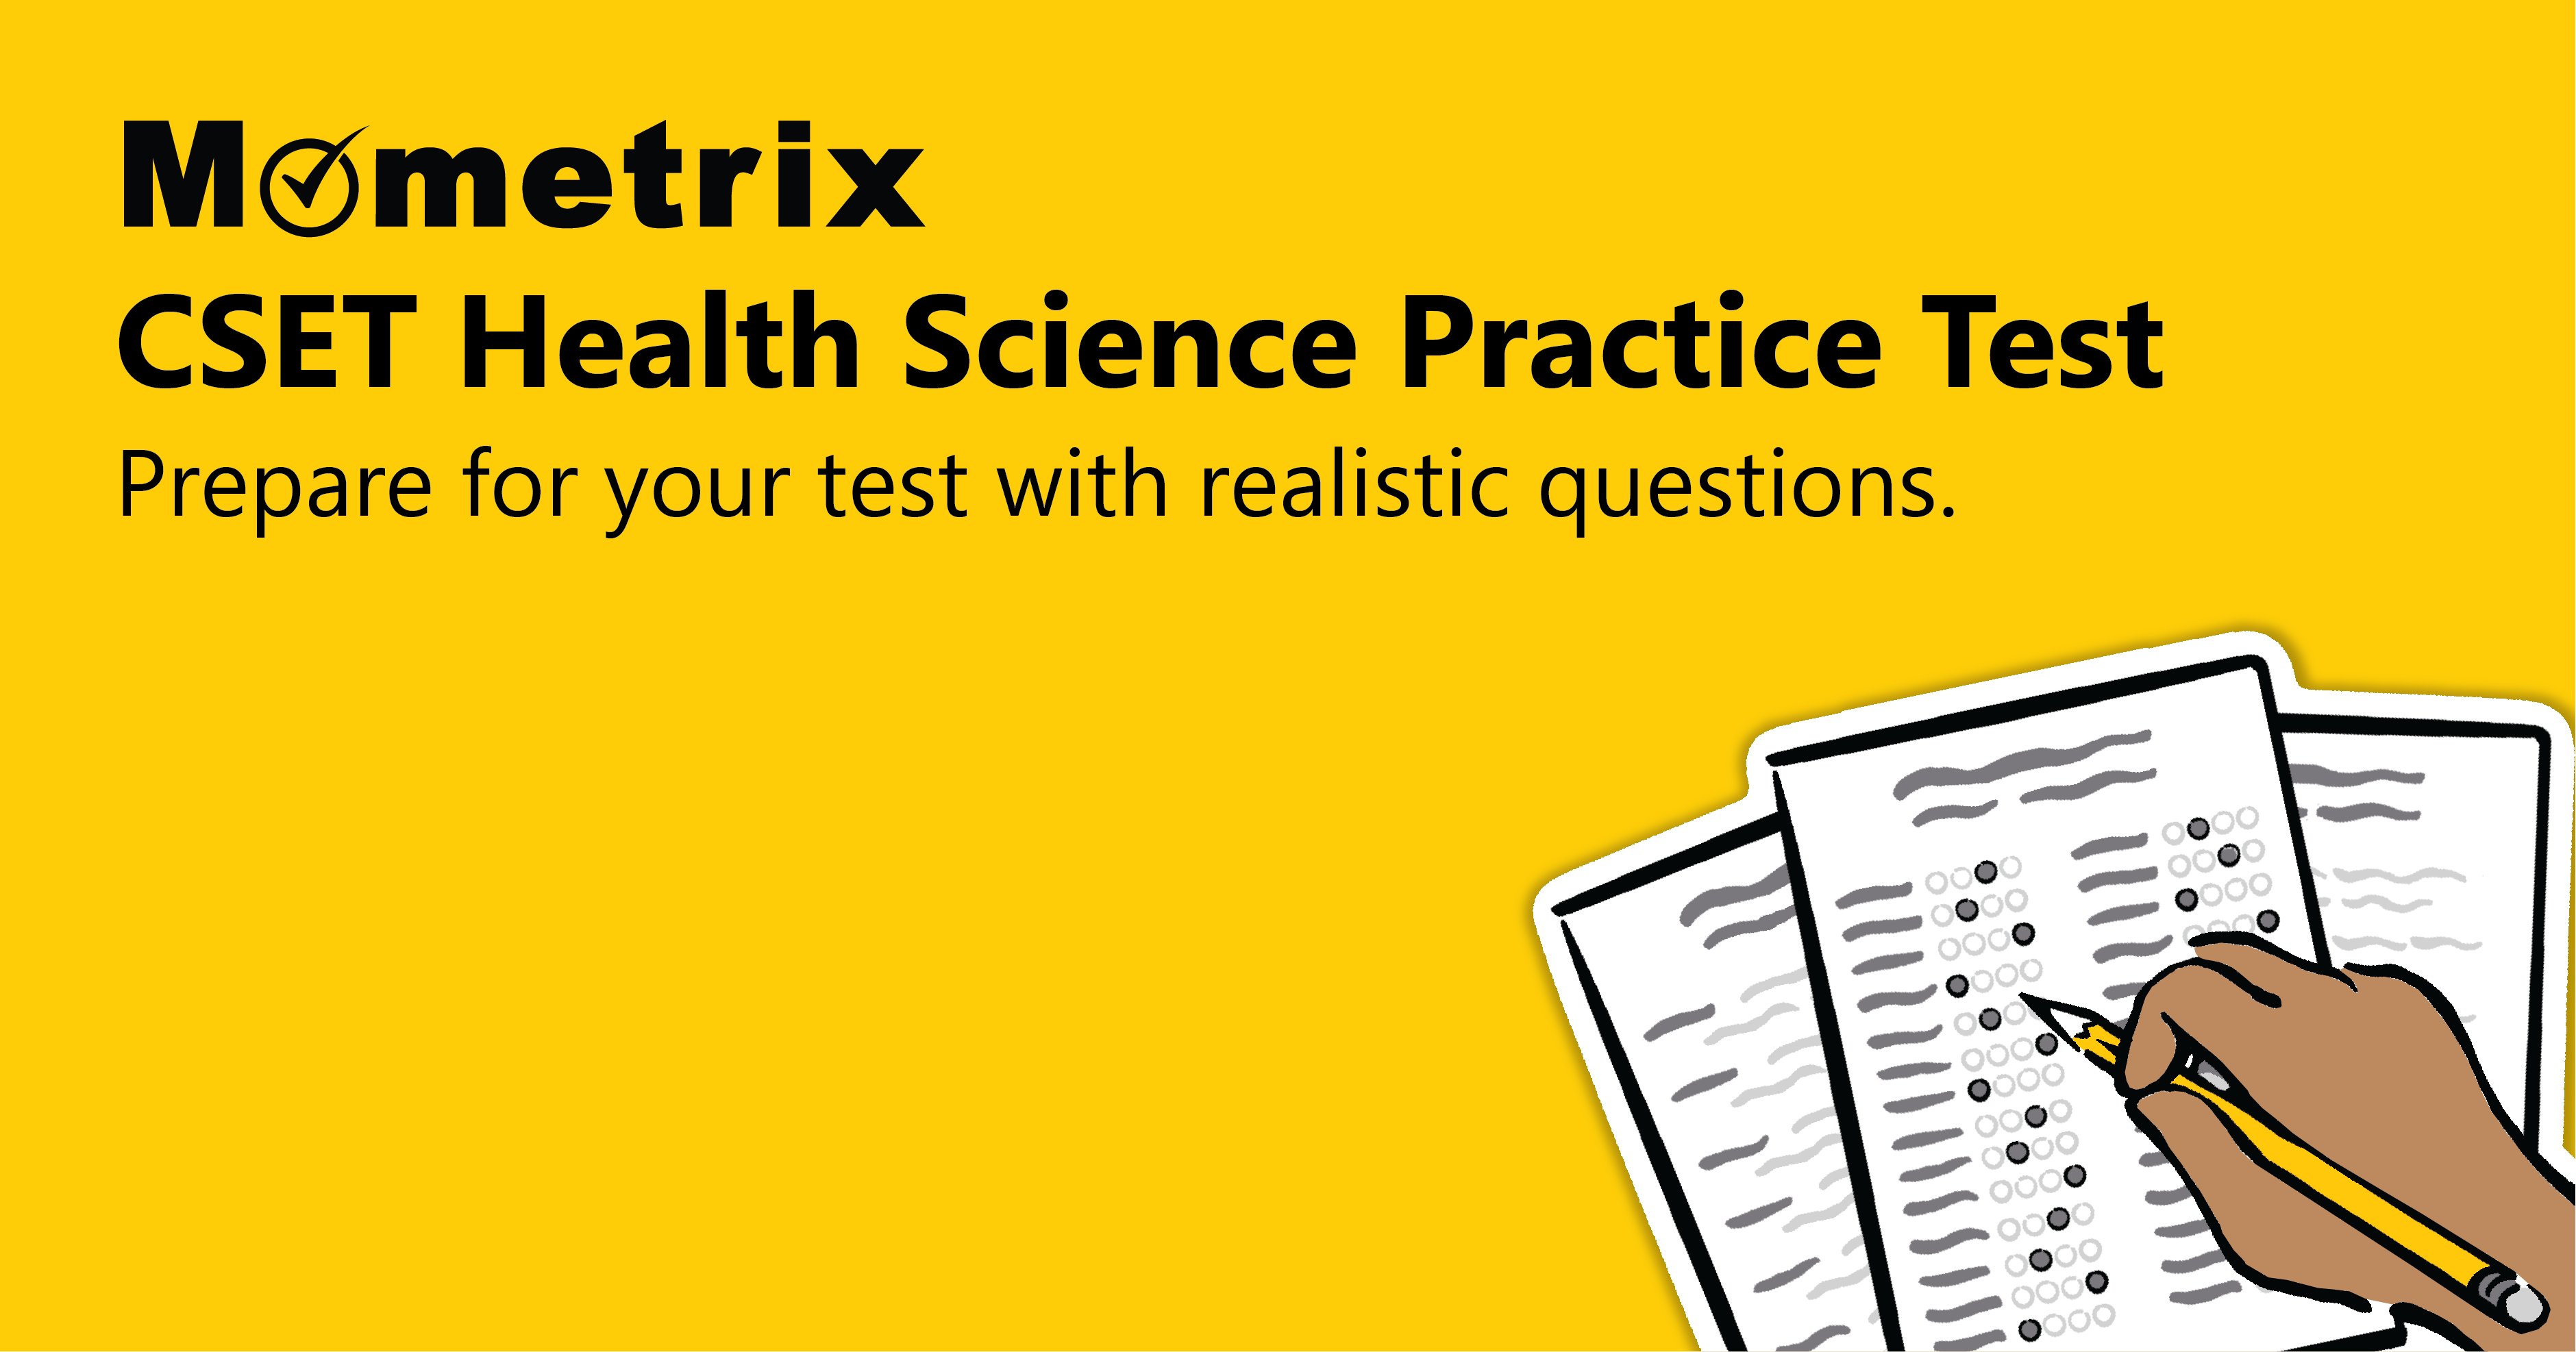 Yellow background with text: "Mometrix CSET Health Science Practice Test. Prepare for your test with realistic questions." Illustration of a hand holding a pencil, marking answers on test sheets.